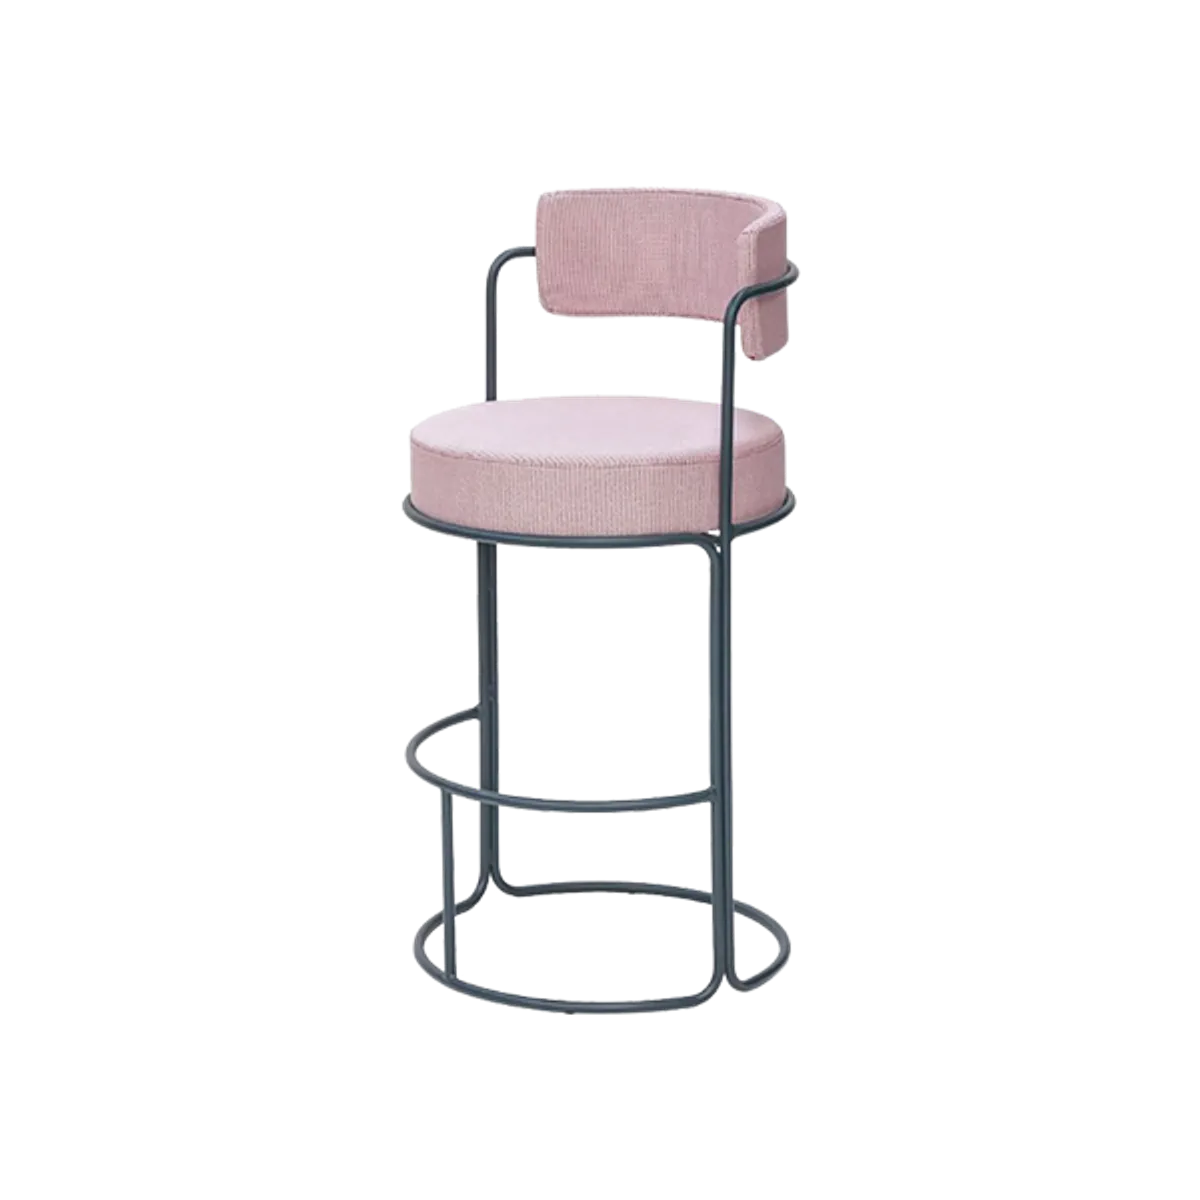 Web Miami Outdoor Stool With Metal Frame Circular Shape And Pink Upholstery For Trendy Hotels And Relaxed Bars Inside Out Contracts